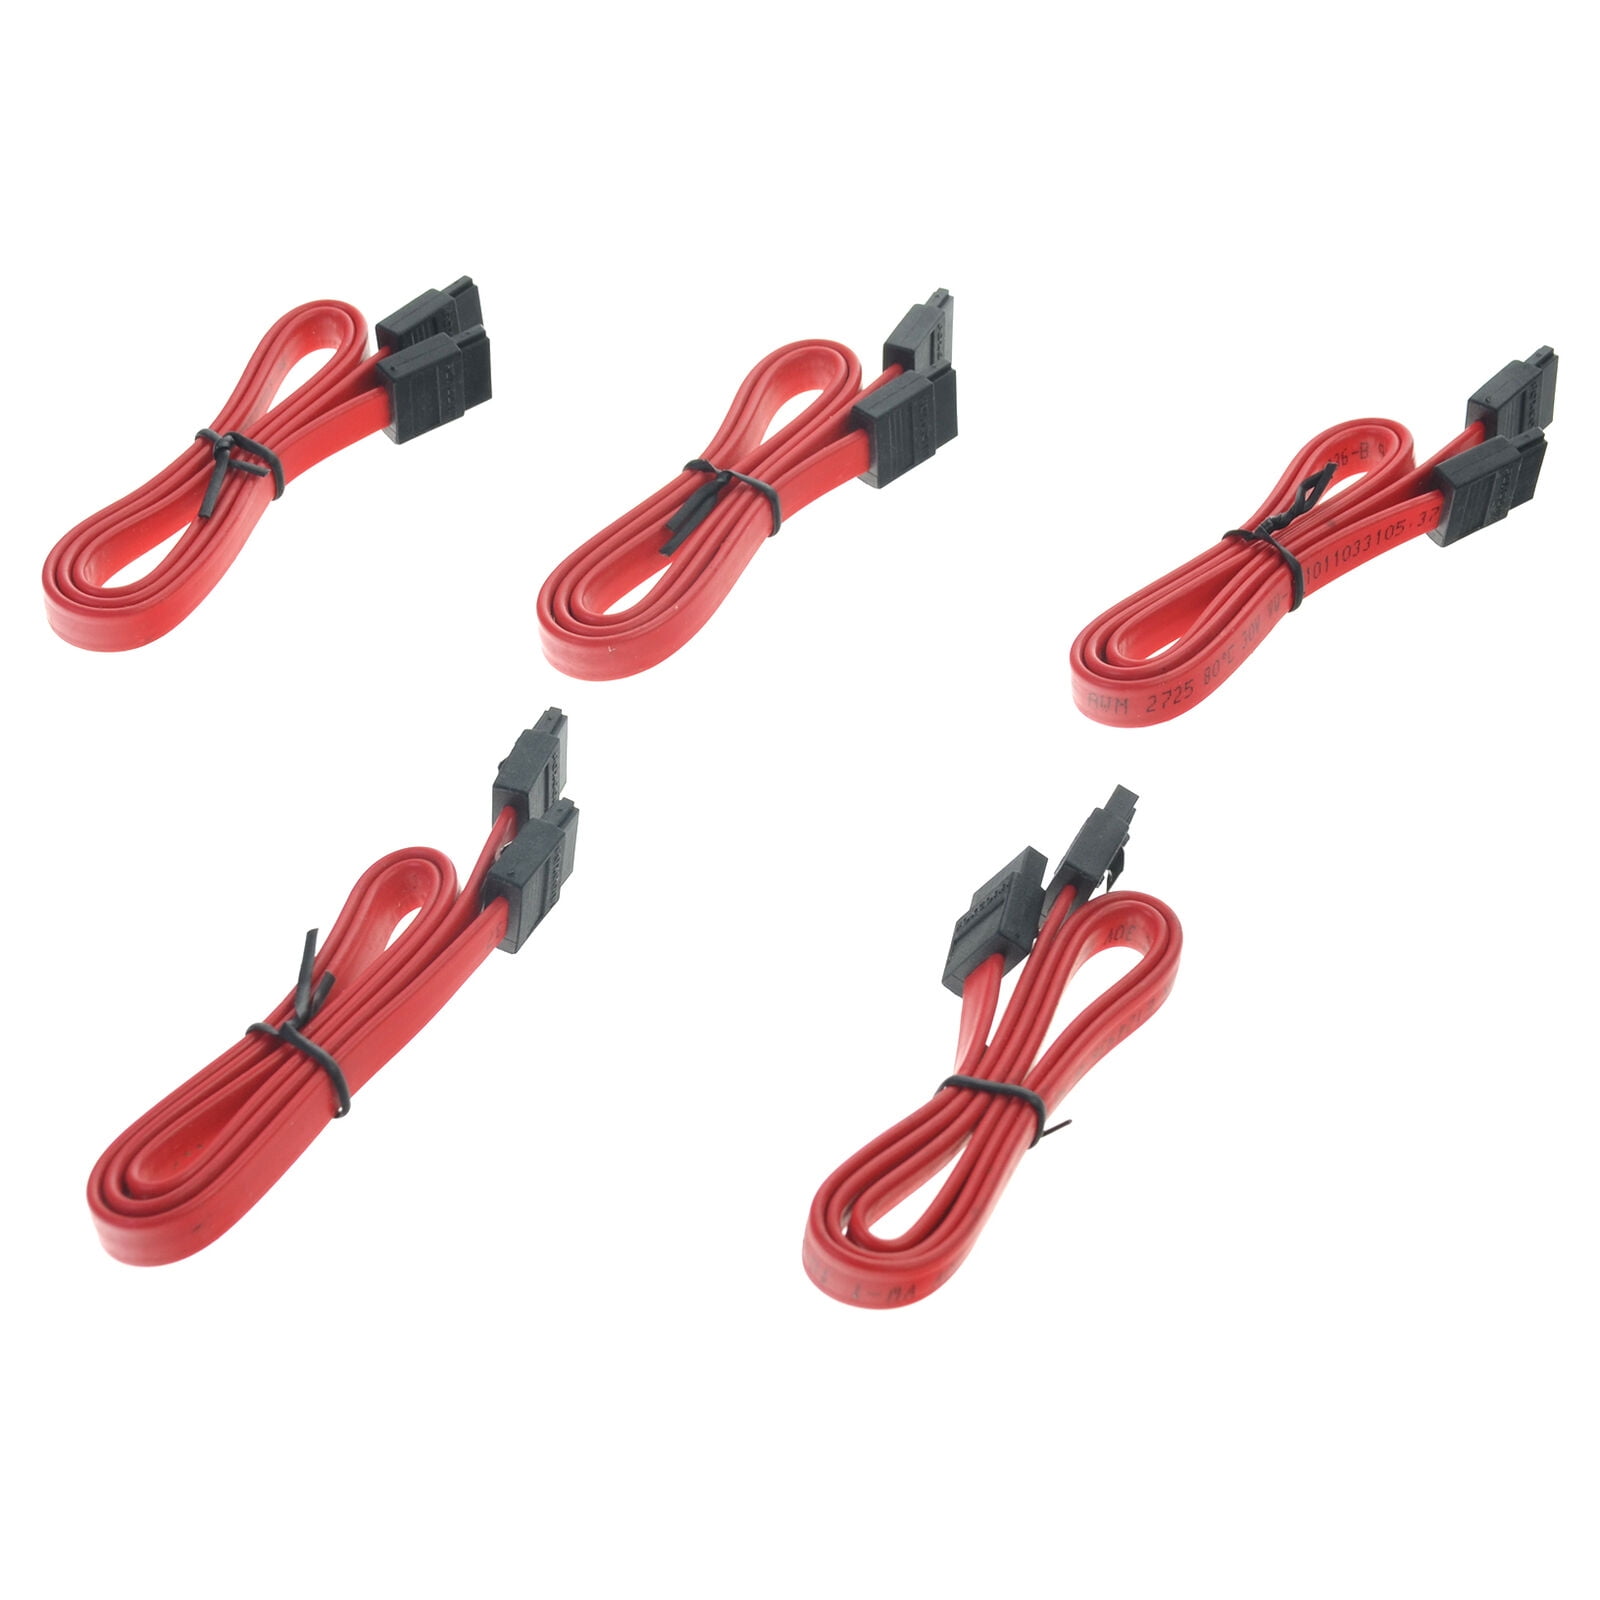 5 x 15inch SATA 3.0 III SATA3 SATAiii 6Gb/s Data Cable Wire 50cm for HDD Hard Drive SSD- Red